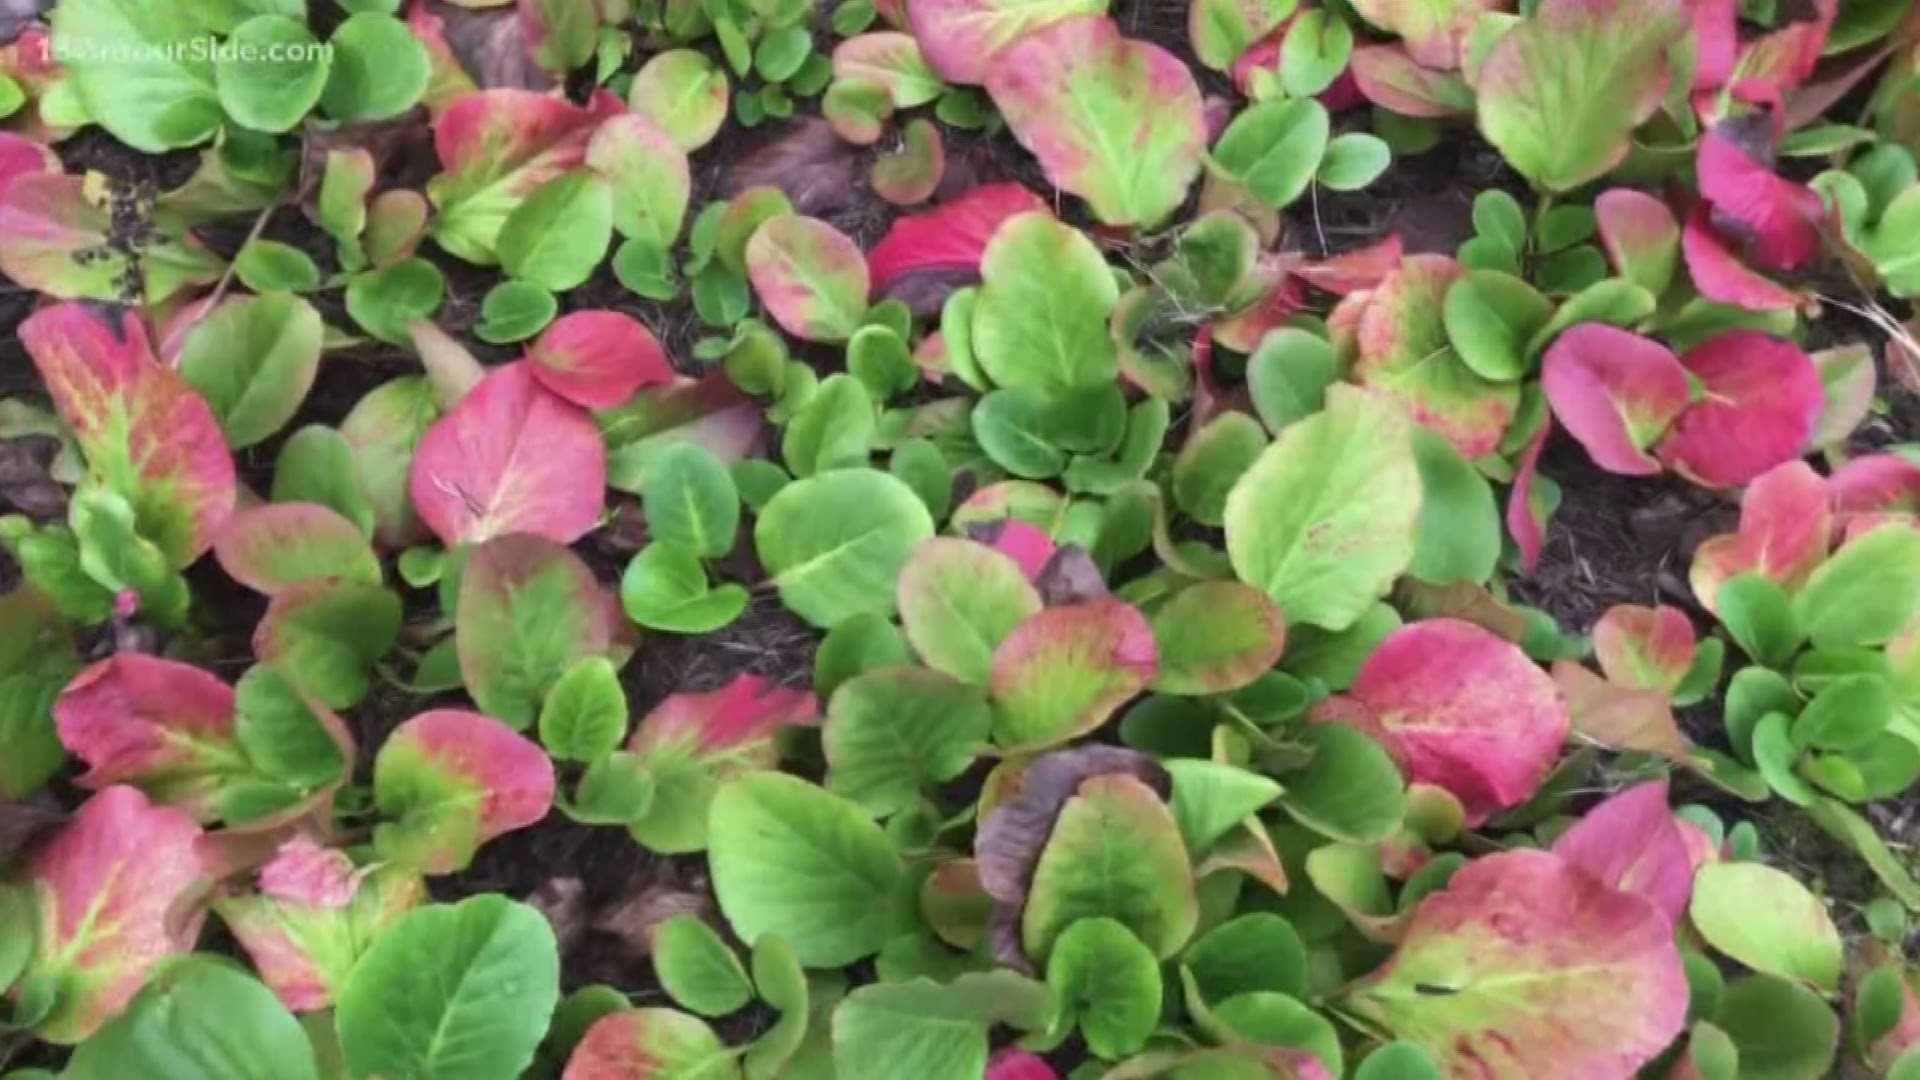 Greenthumb expert Rick Vuyst shows off some great plants that have beautiful fall colors.